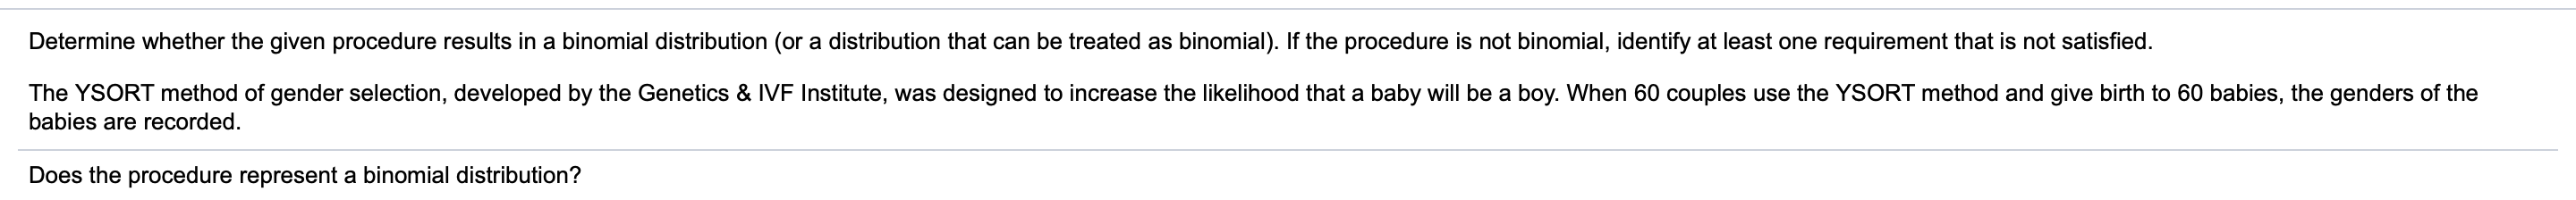 Determine whether the given procedure results in a binomial distribution (or a distribution that can be treated as binomial). If the procedure is not binomial, identify at least one requirement that is not satisfied.
The YSORT method of gender selection, developed by the Genetics & IVF Institute, was designed to increase the likelihood that a baby will be a boy. When 60 couples use the YSORT method and give birth to 60 babies, the genders of the
babies are recorded.
Does the procedure represent a binomial distribution?
